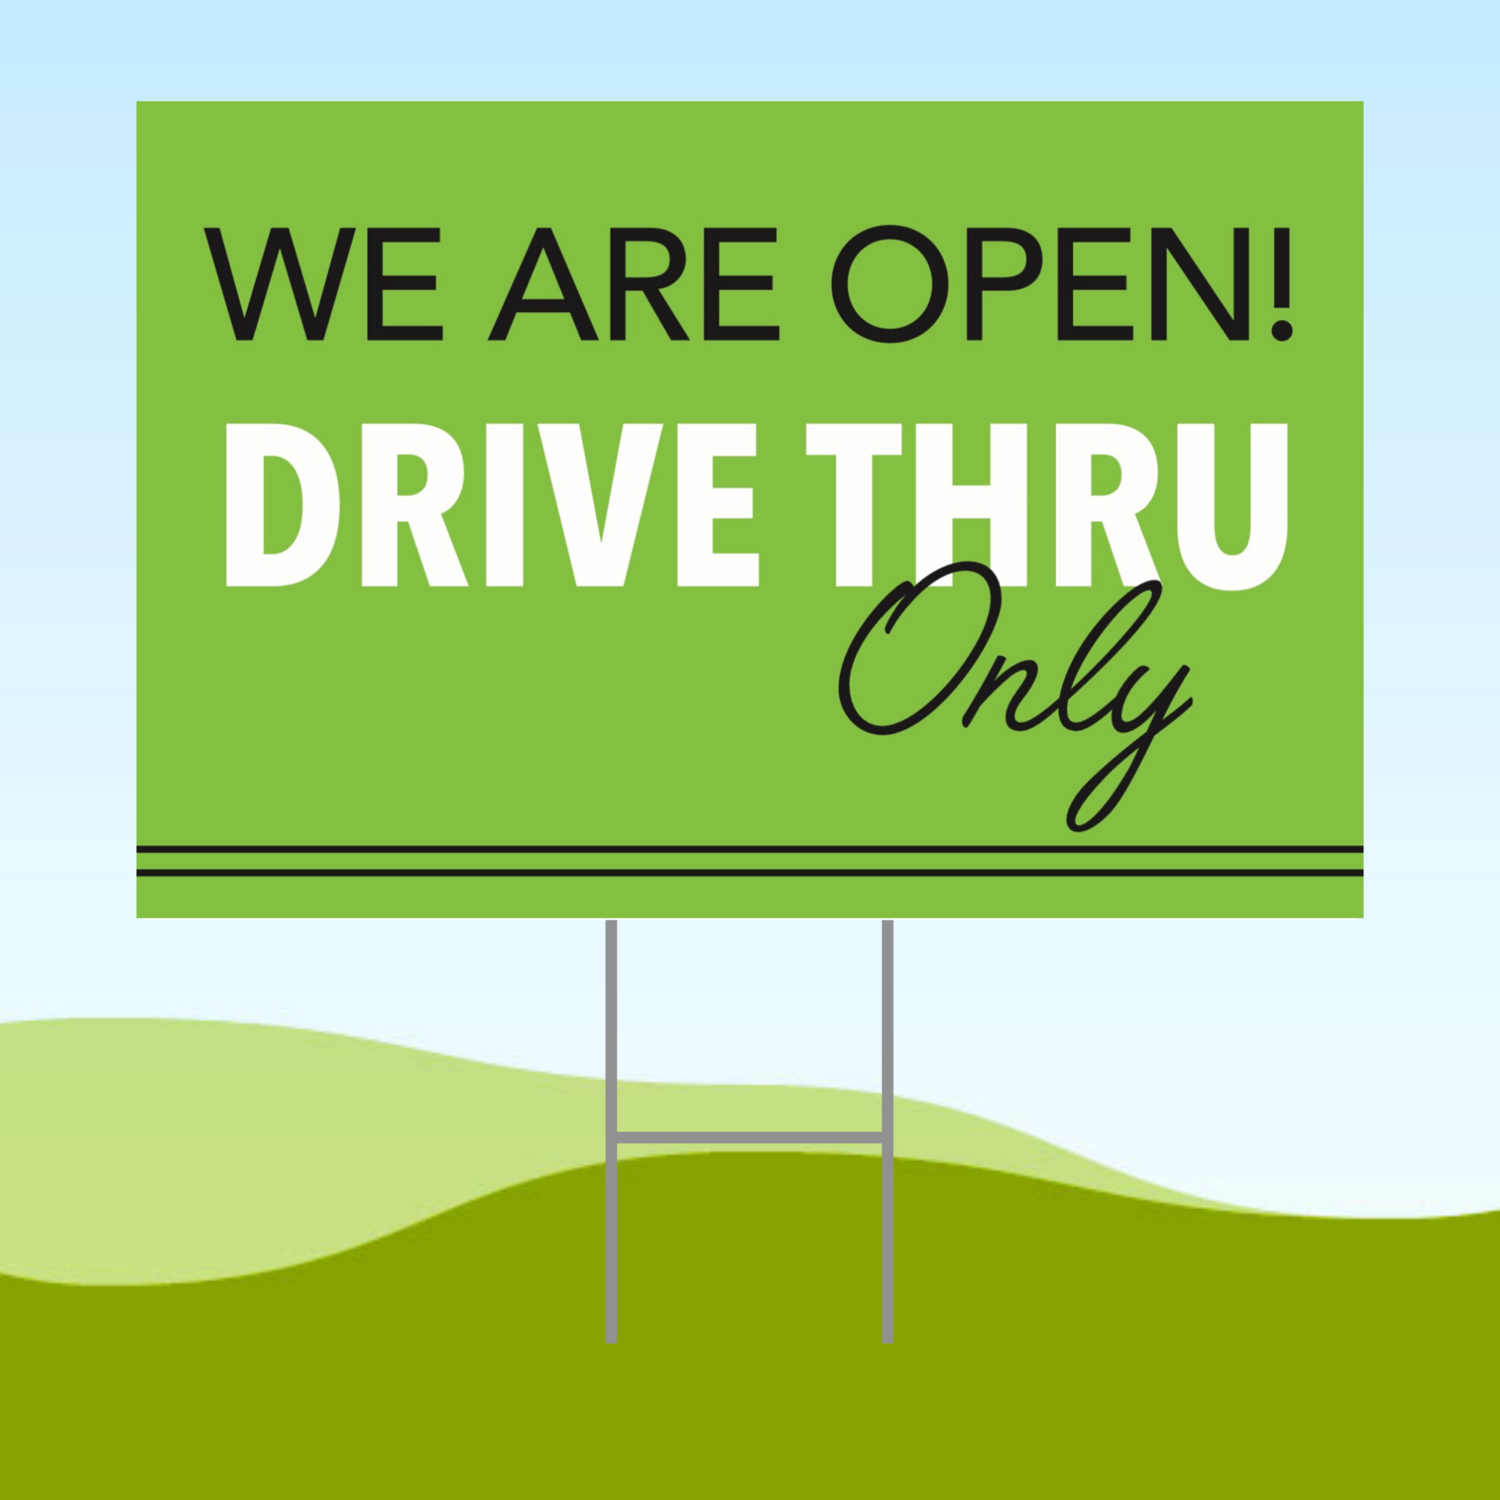 We Are Open Drive Thru Only 18x24 Yard Sign WITH STAKE Corrugated Plastic Bandit